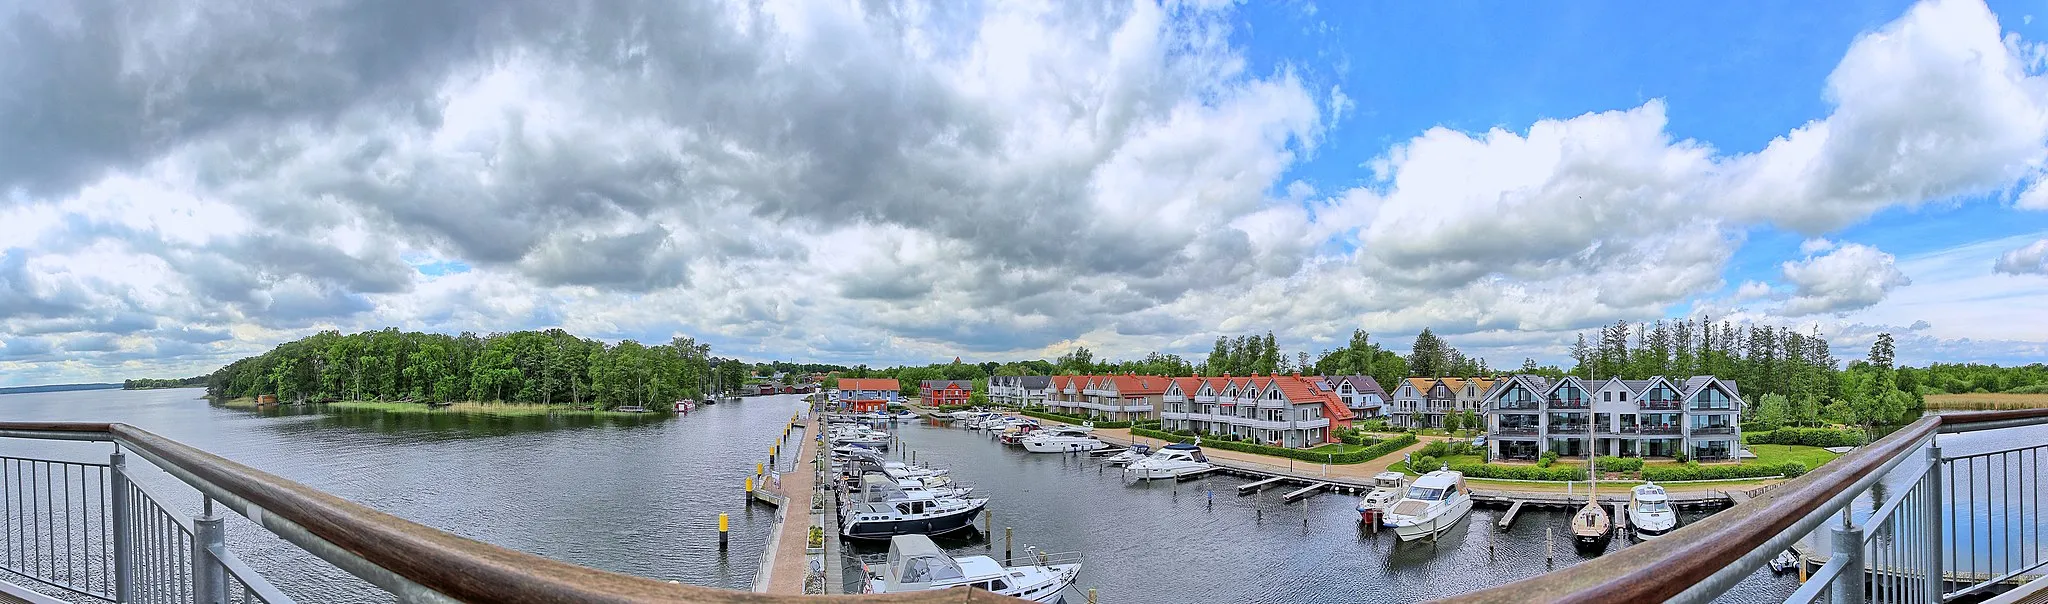 Photo showing: Plau am See/Mecklenburg-Western Pomerania, "An der Metow", marina: 240° panorama from the observation tower / lighthouse over the marina (facing west);